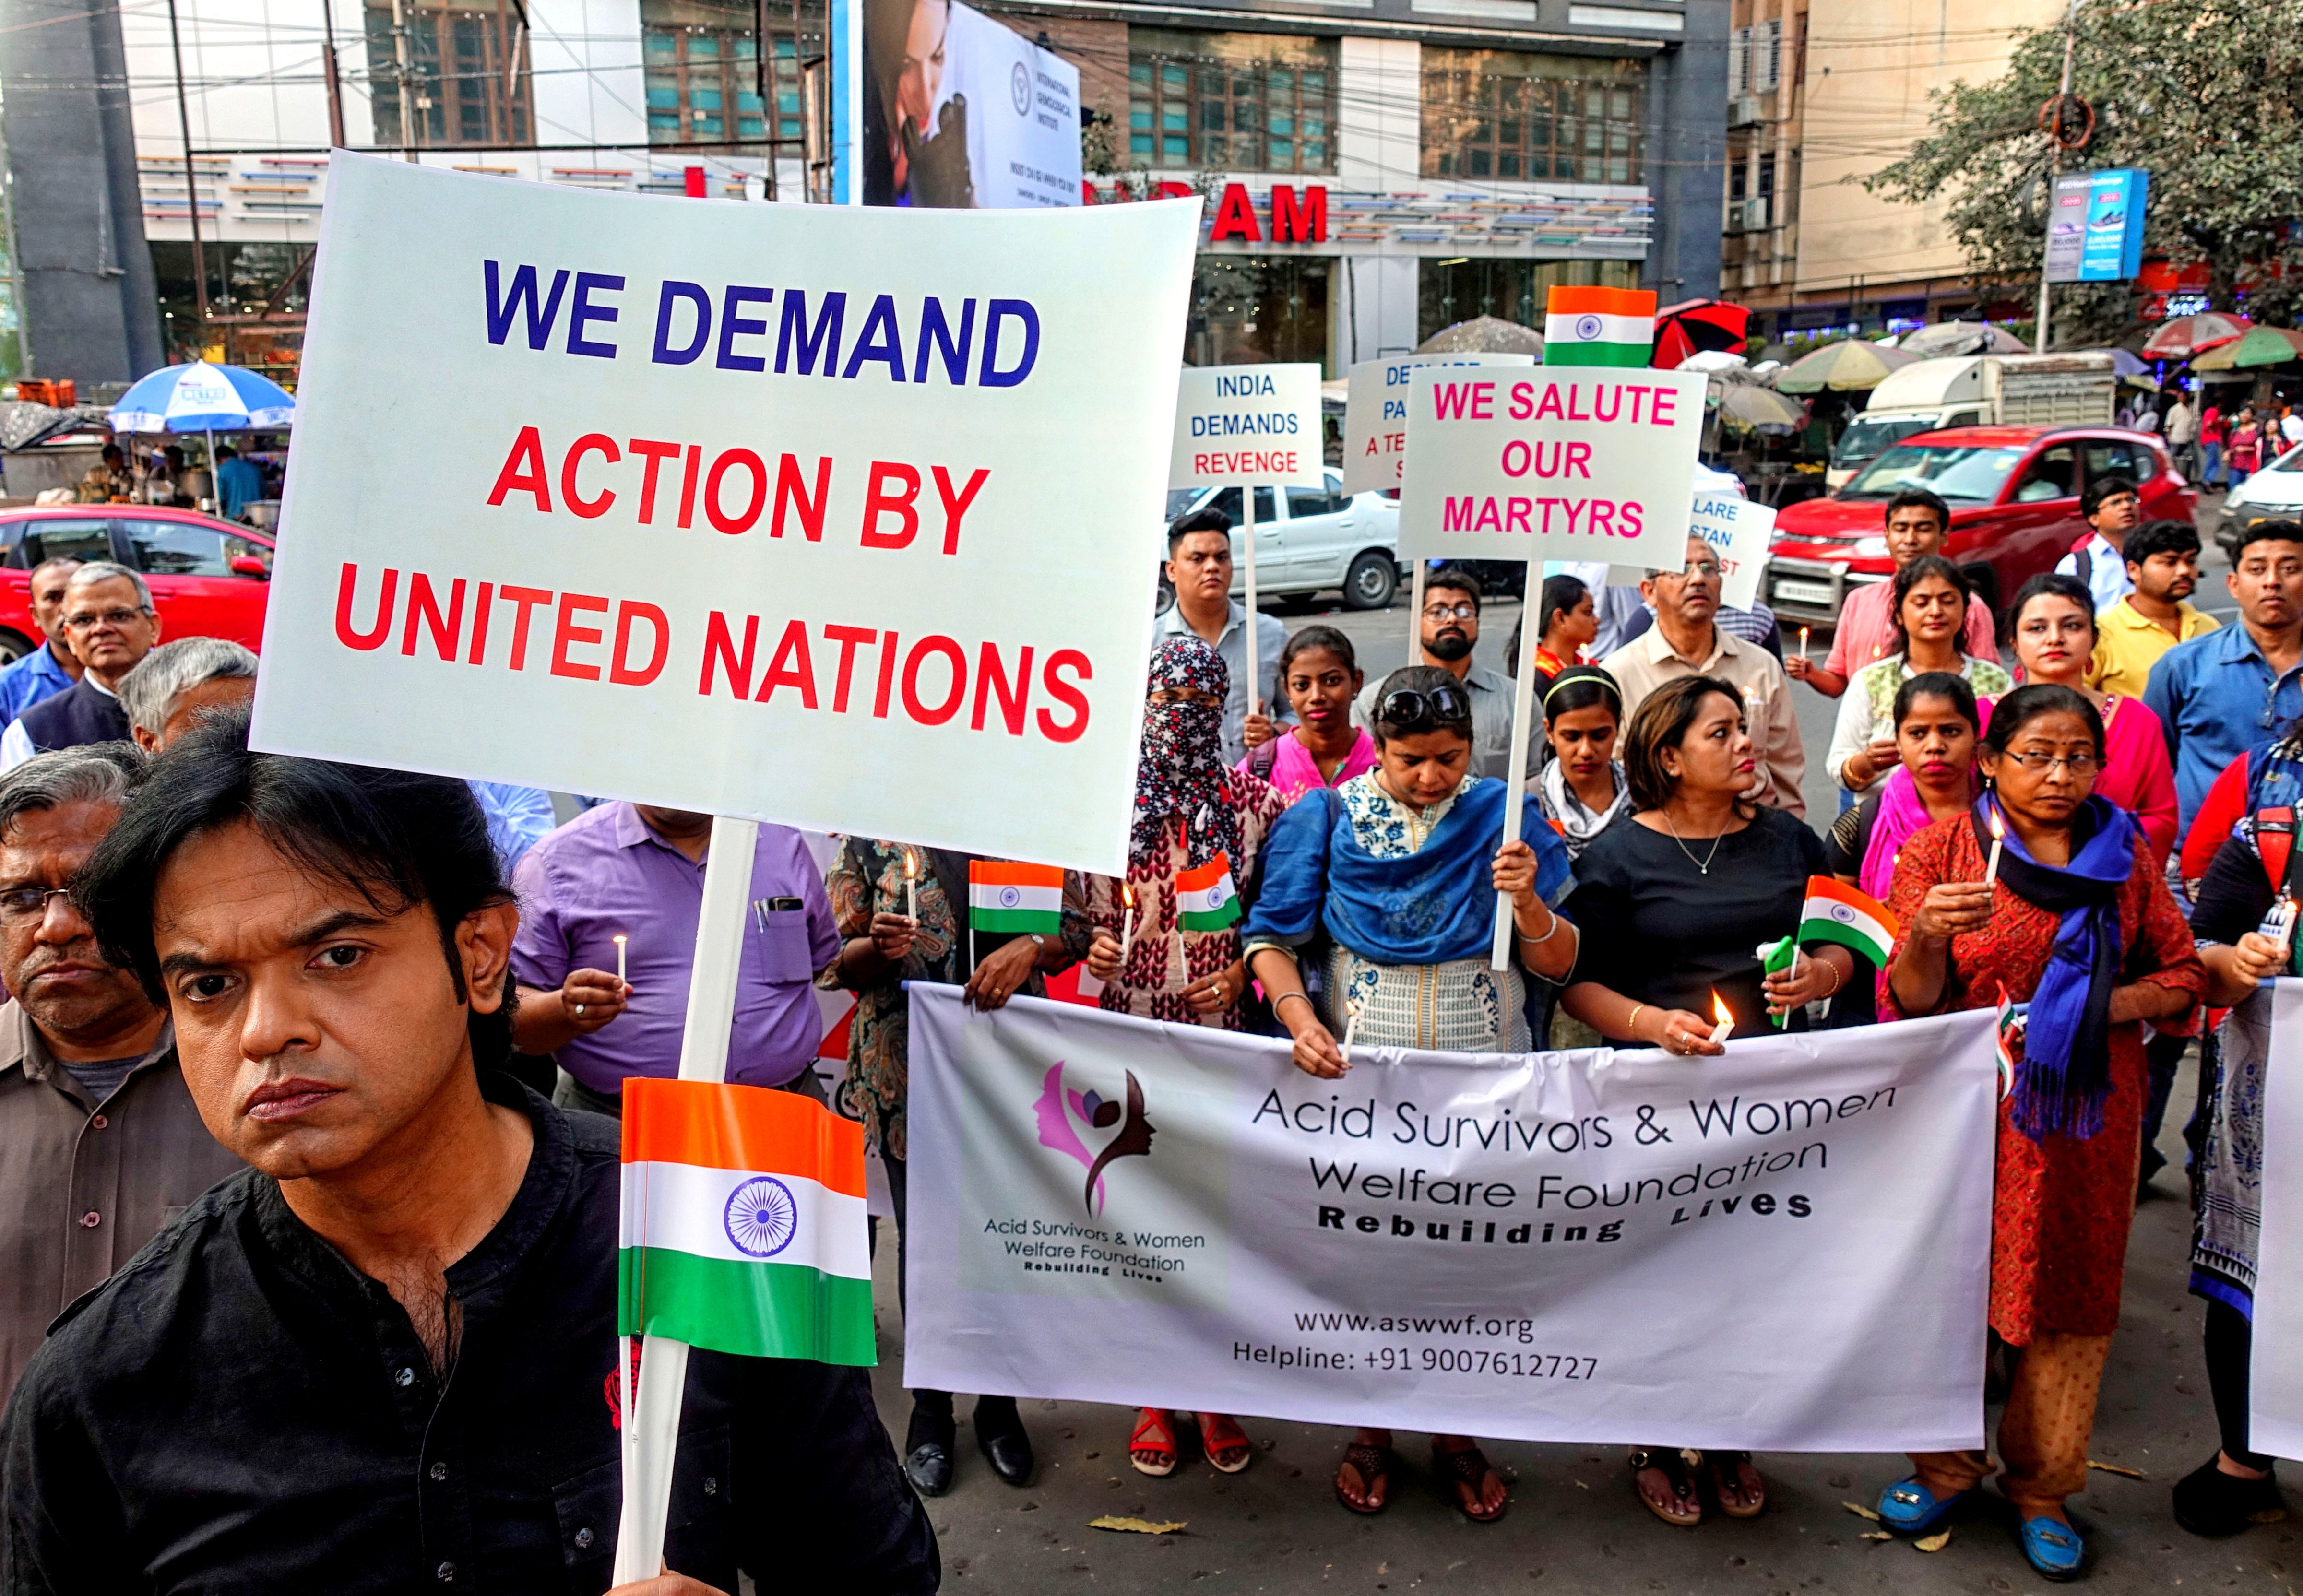 Demonstrators gathering in front of the British Council &amp; UNICEF West Bengal Office demanding U.N. action against Pakistan and the perpetrators of the Pulwama terrorist attack on Feb. 19, 2019. (Avishek DasS&mdash;OPA Images/LightRocket/Getty Images)